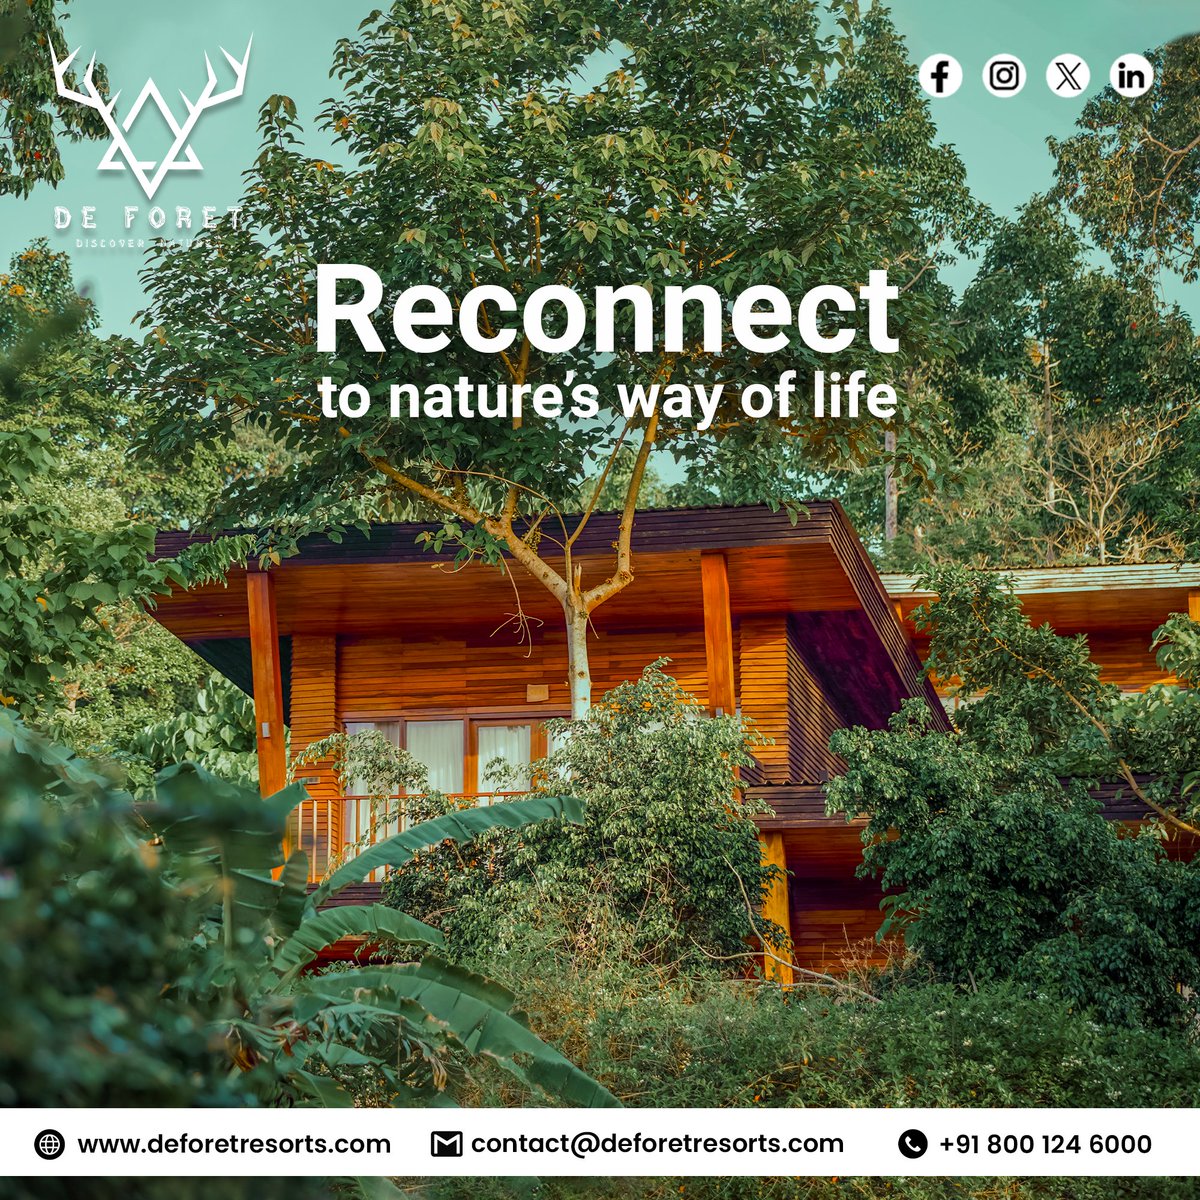 Find the true essence of nature's harmony at De Foret Resort. Embrace life's simplicity & beauty as you immerse yourself in our peaceful surroundings, reconnecting with the tranquility of the natural world

#natureslife #natureresort #resort #naturelovers  #nature  #naturehealing